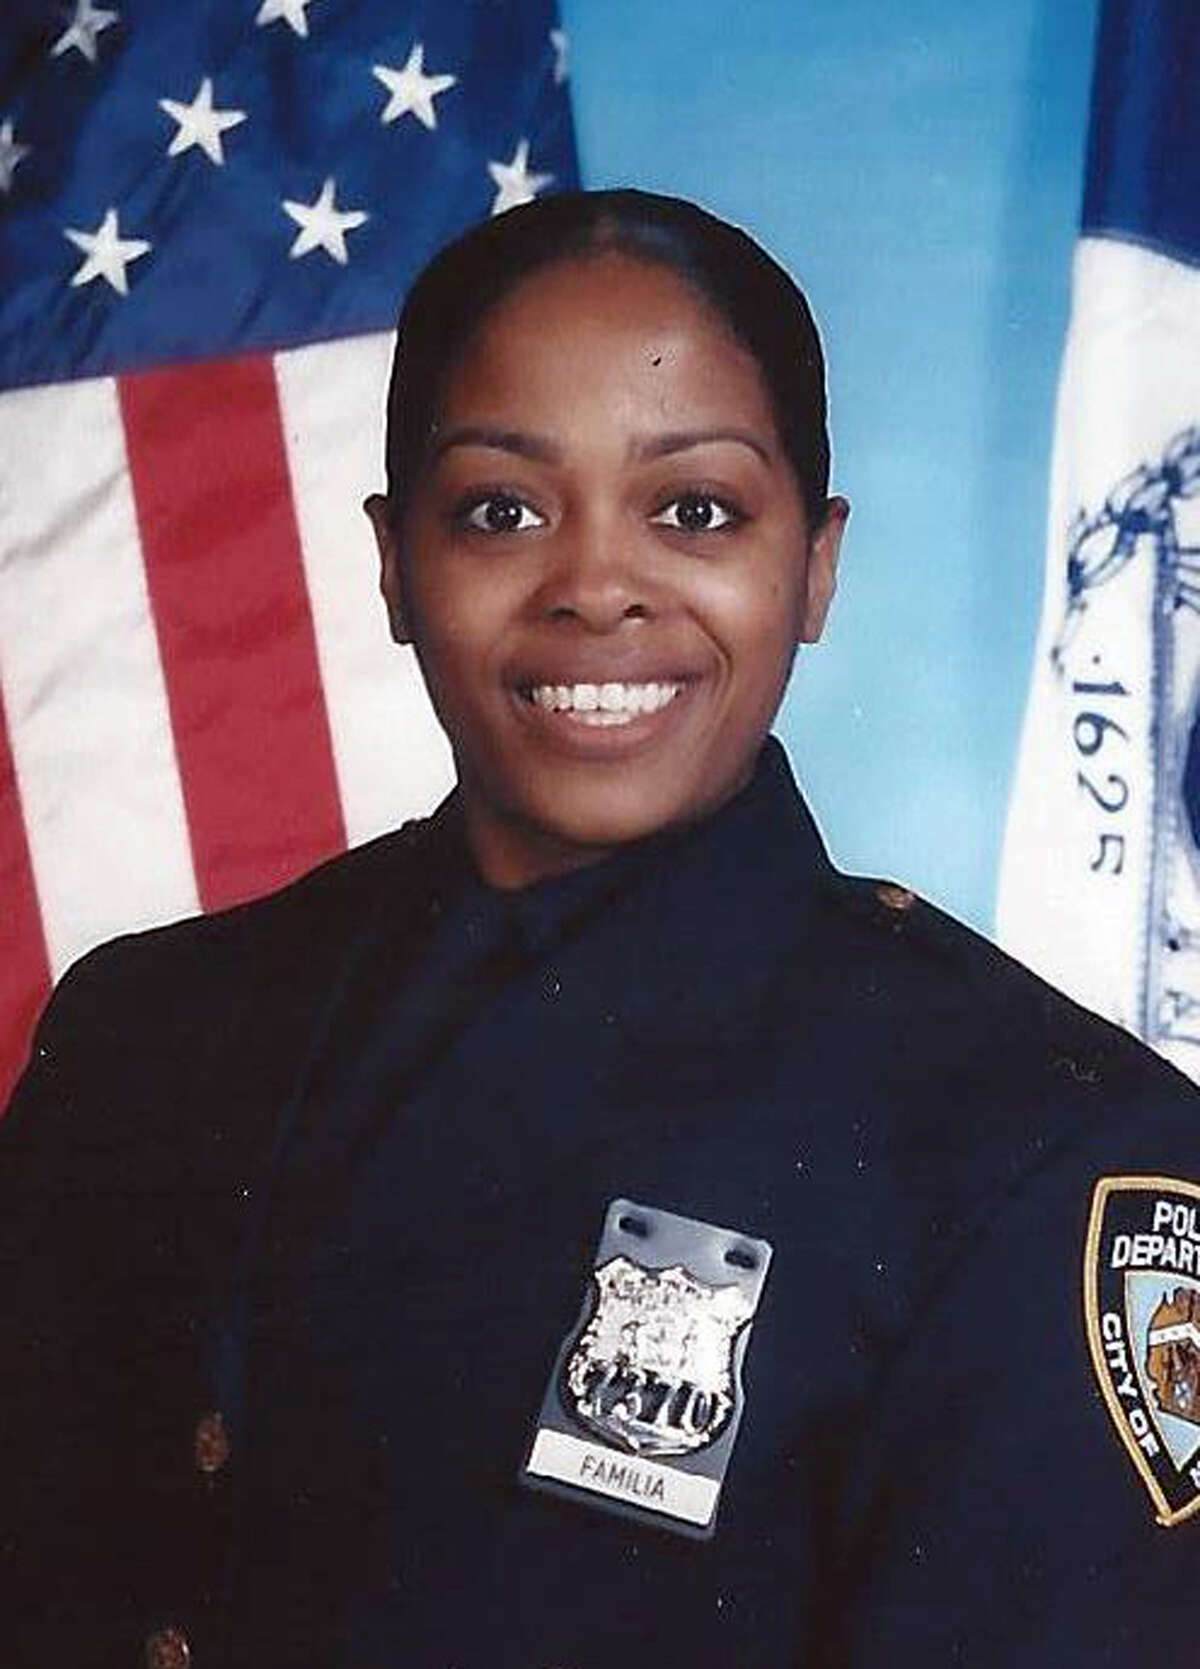 This undated photo provided by the New York Police Department shows officer Miosotis Familia, who was shot to death early Wednesday, July 5, 2017, ambushed inside a command post RV by an ex-convict, authorities said. The gunman was killed by police about a block away. (NYPD via AP)